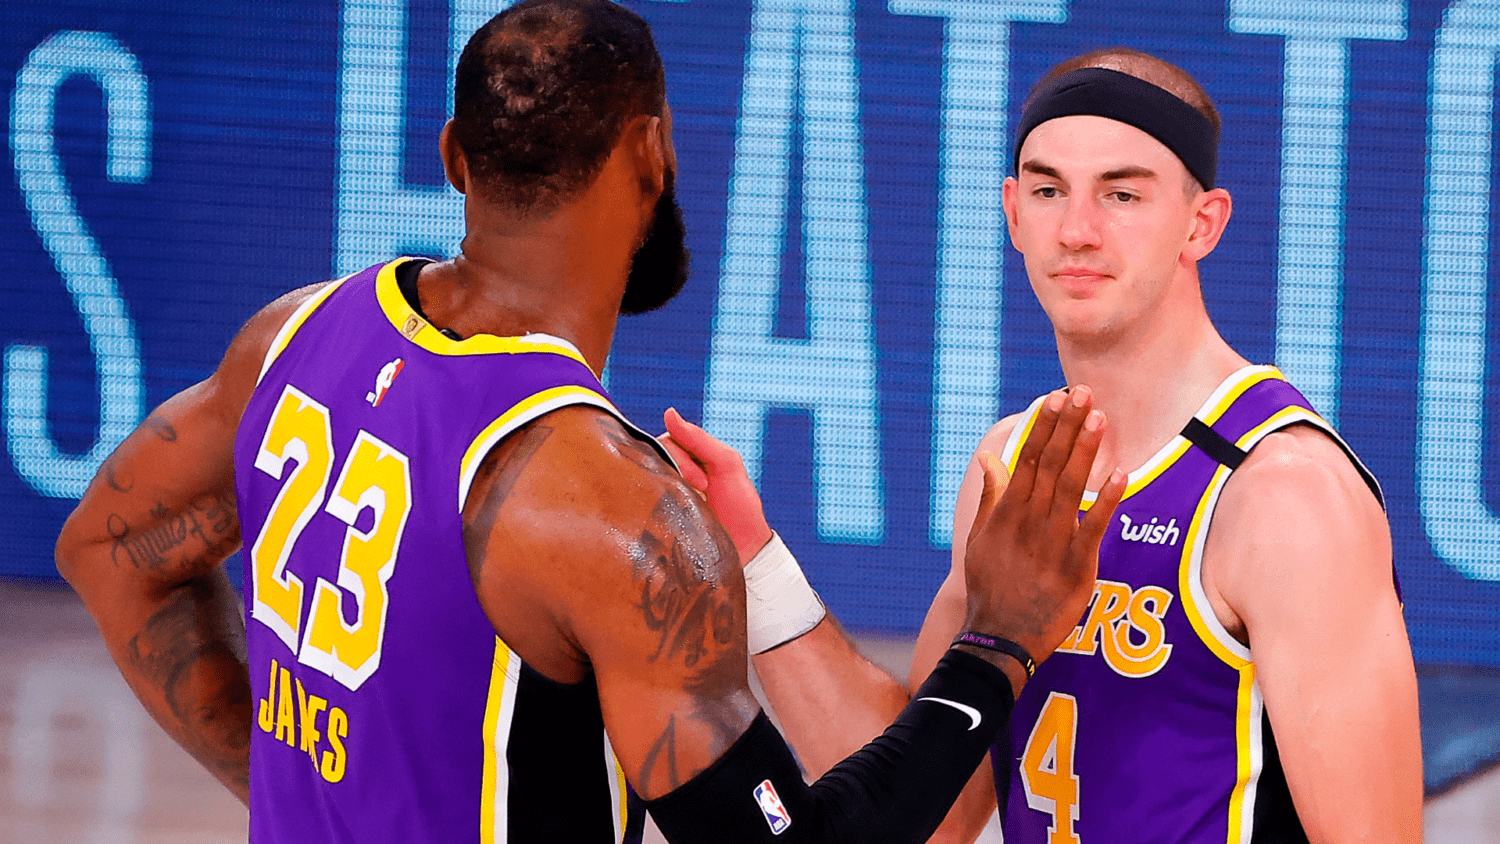 Alex Caruso fit perfectly with LeBron James, so why didn’t the Lakers keep him?